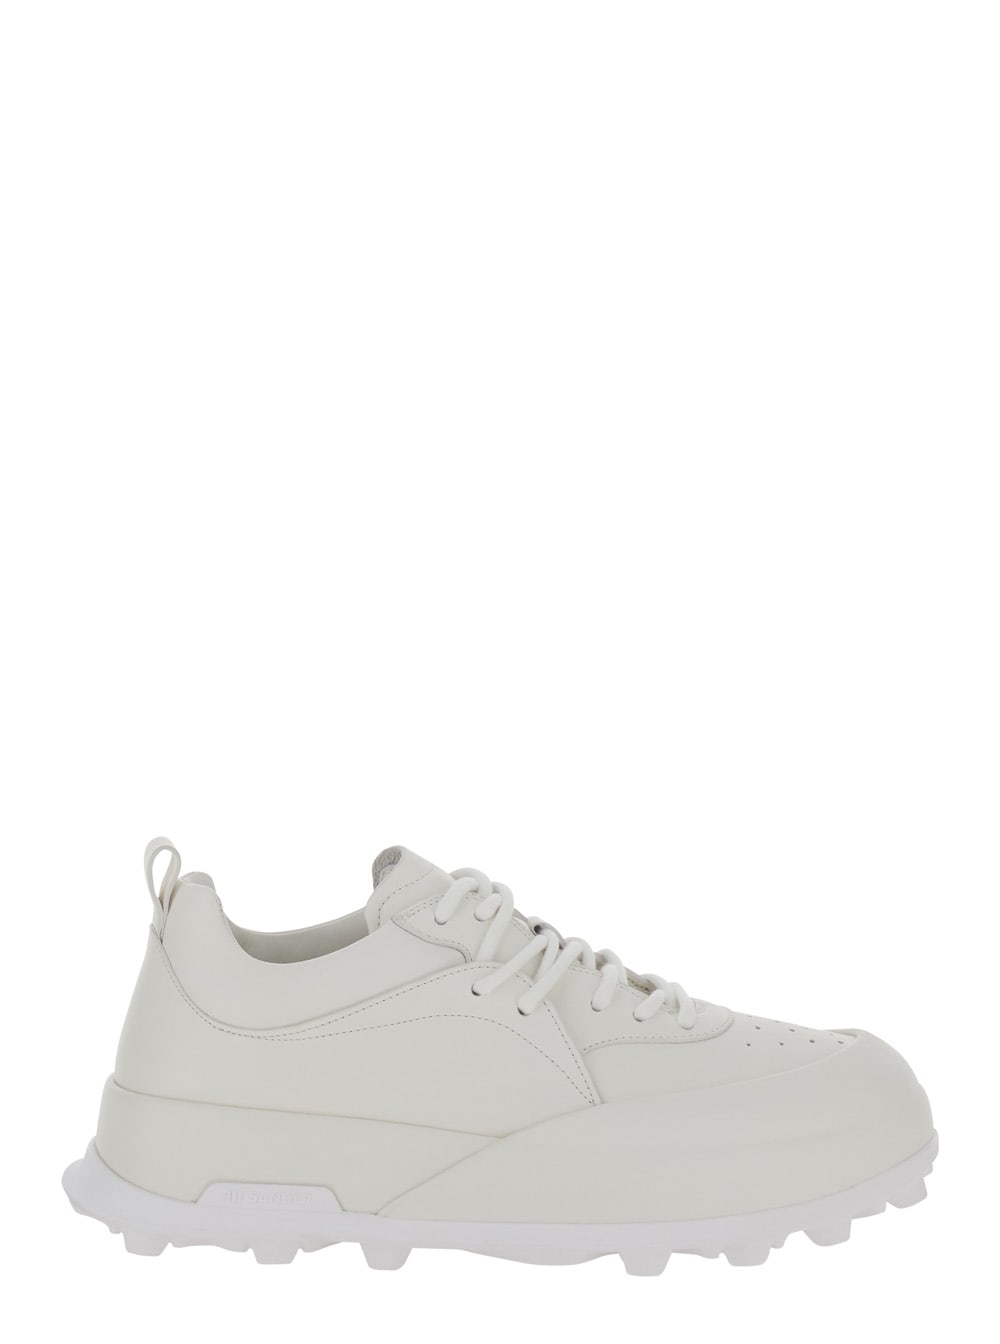 orb White Low Top Sneakers With Cleated Sole In Leather Man